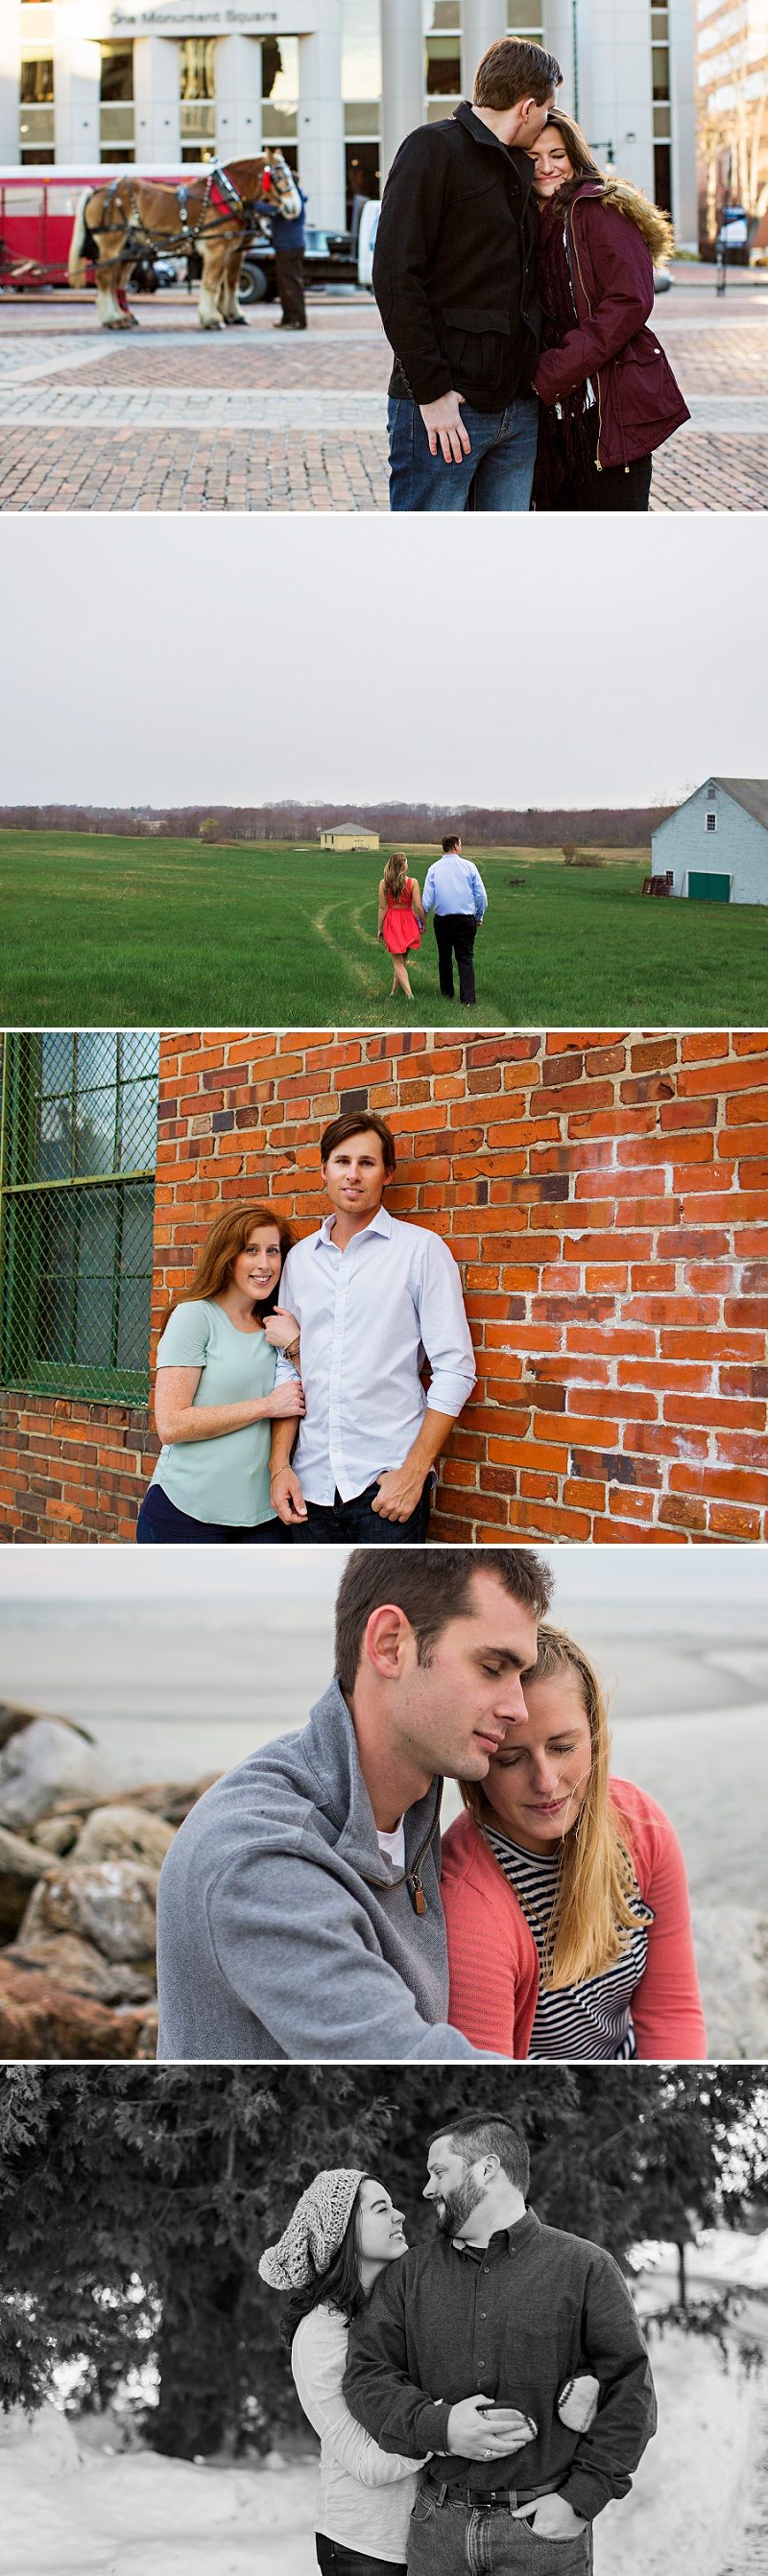 Best-engagement-photos-of-2015-0020